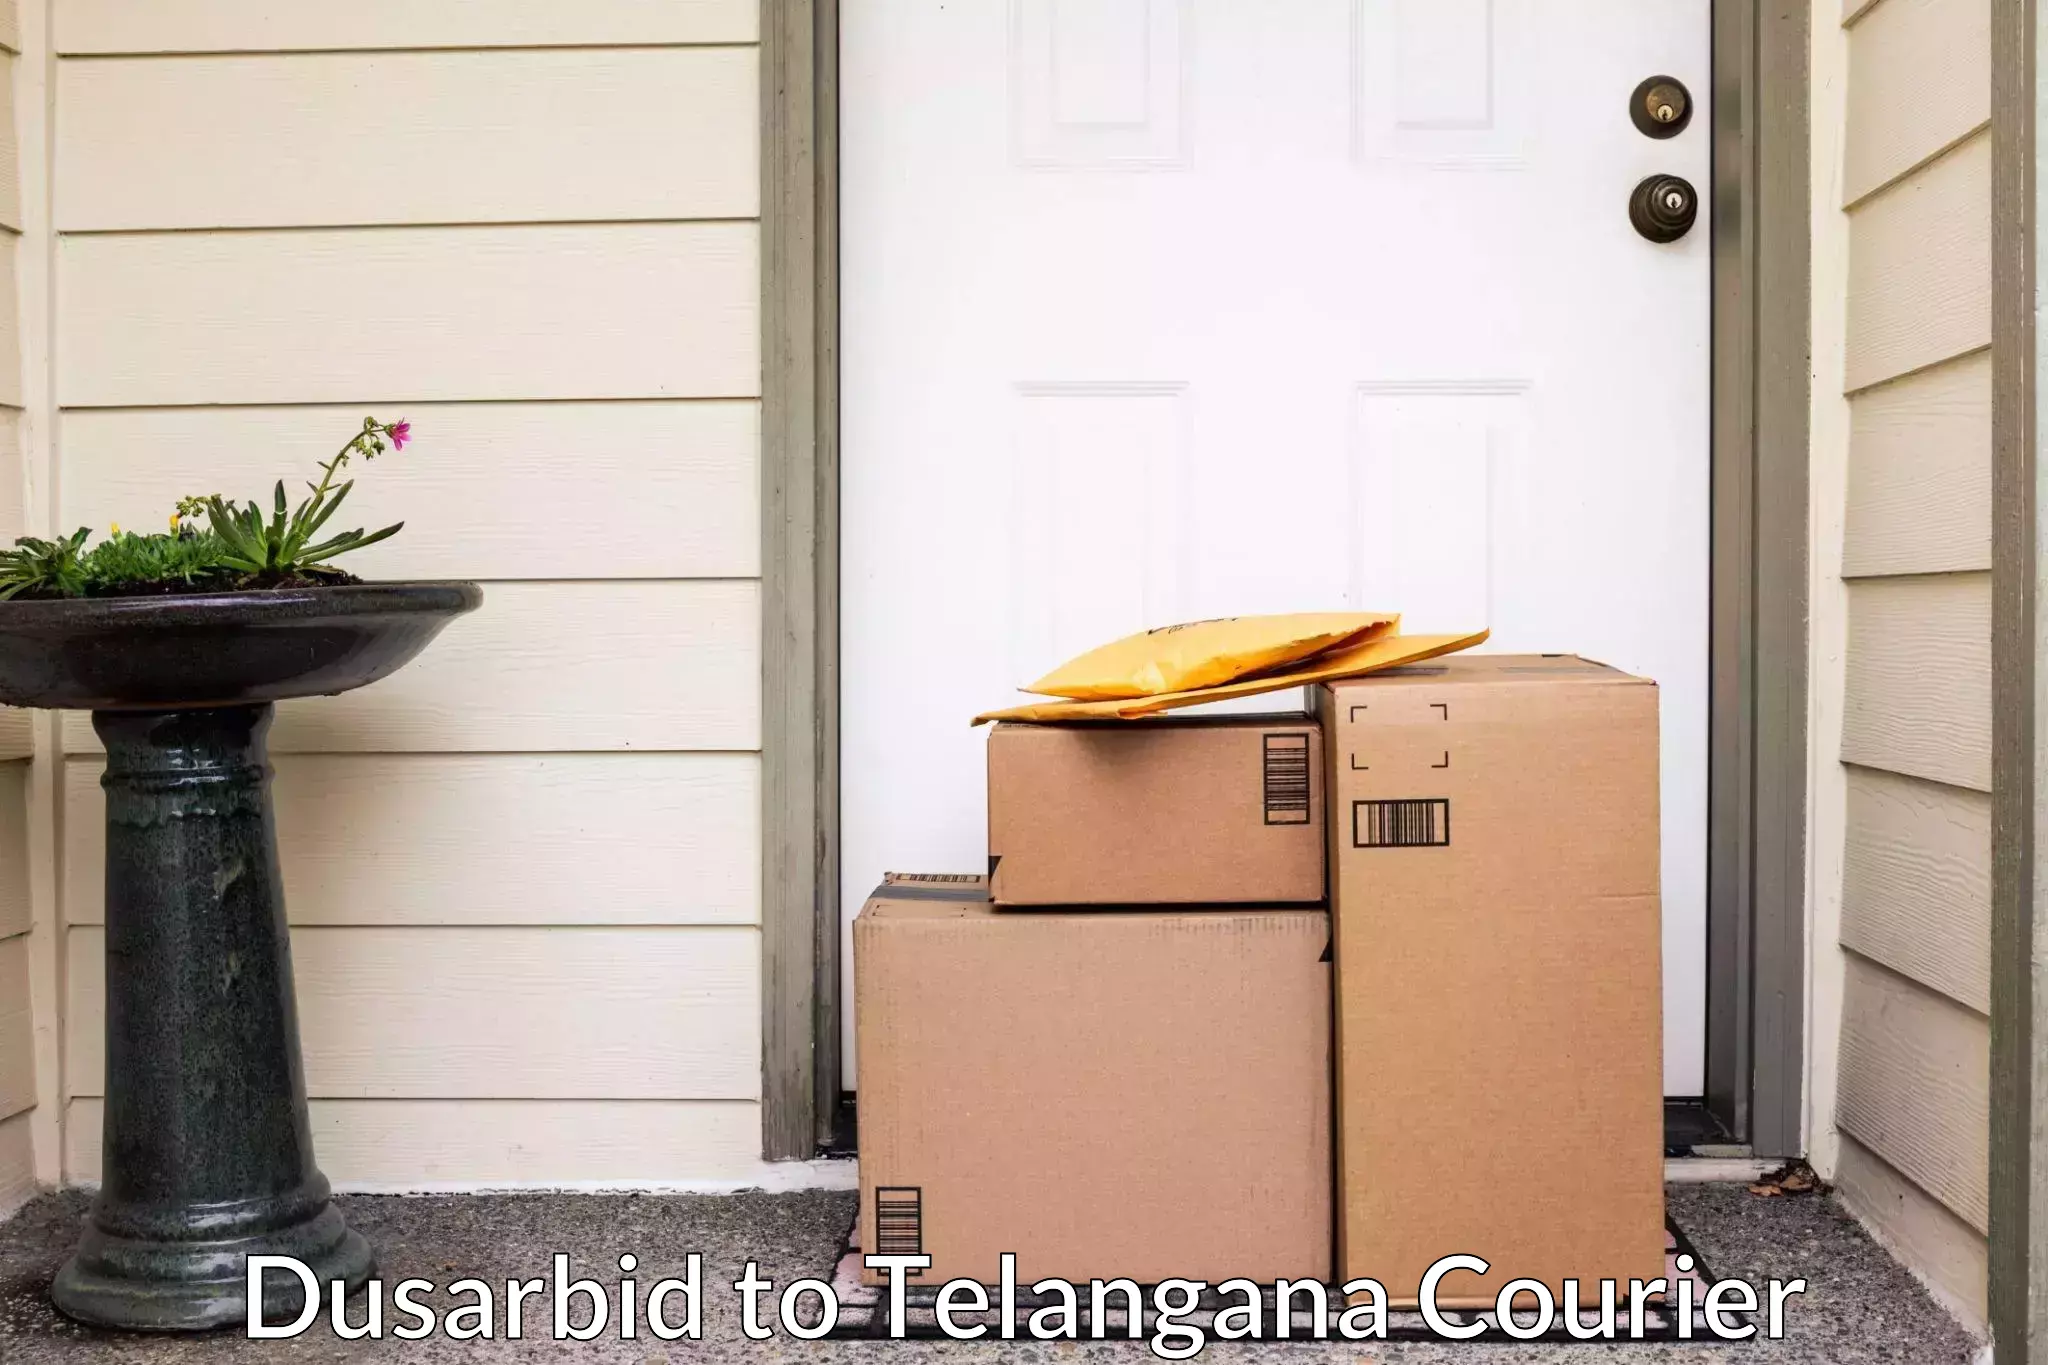 Residential relocation services Dusarbid to Telangana